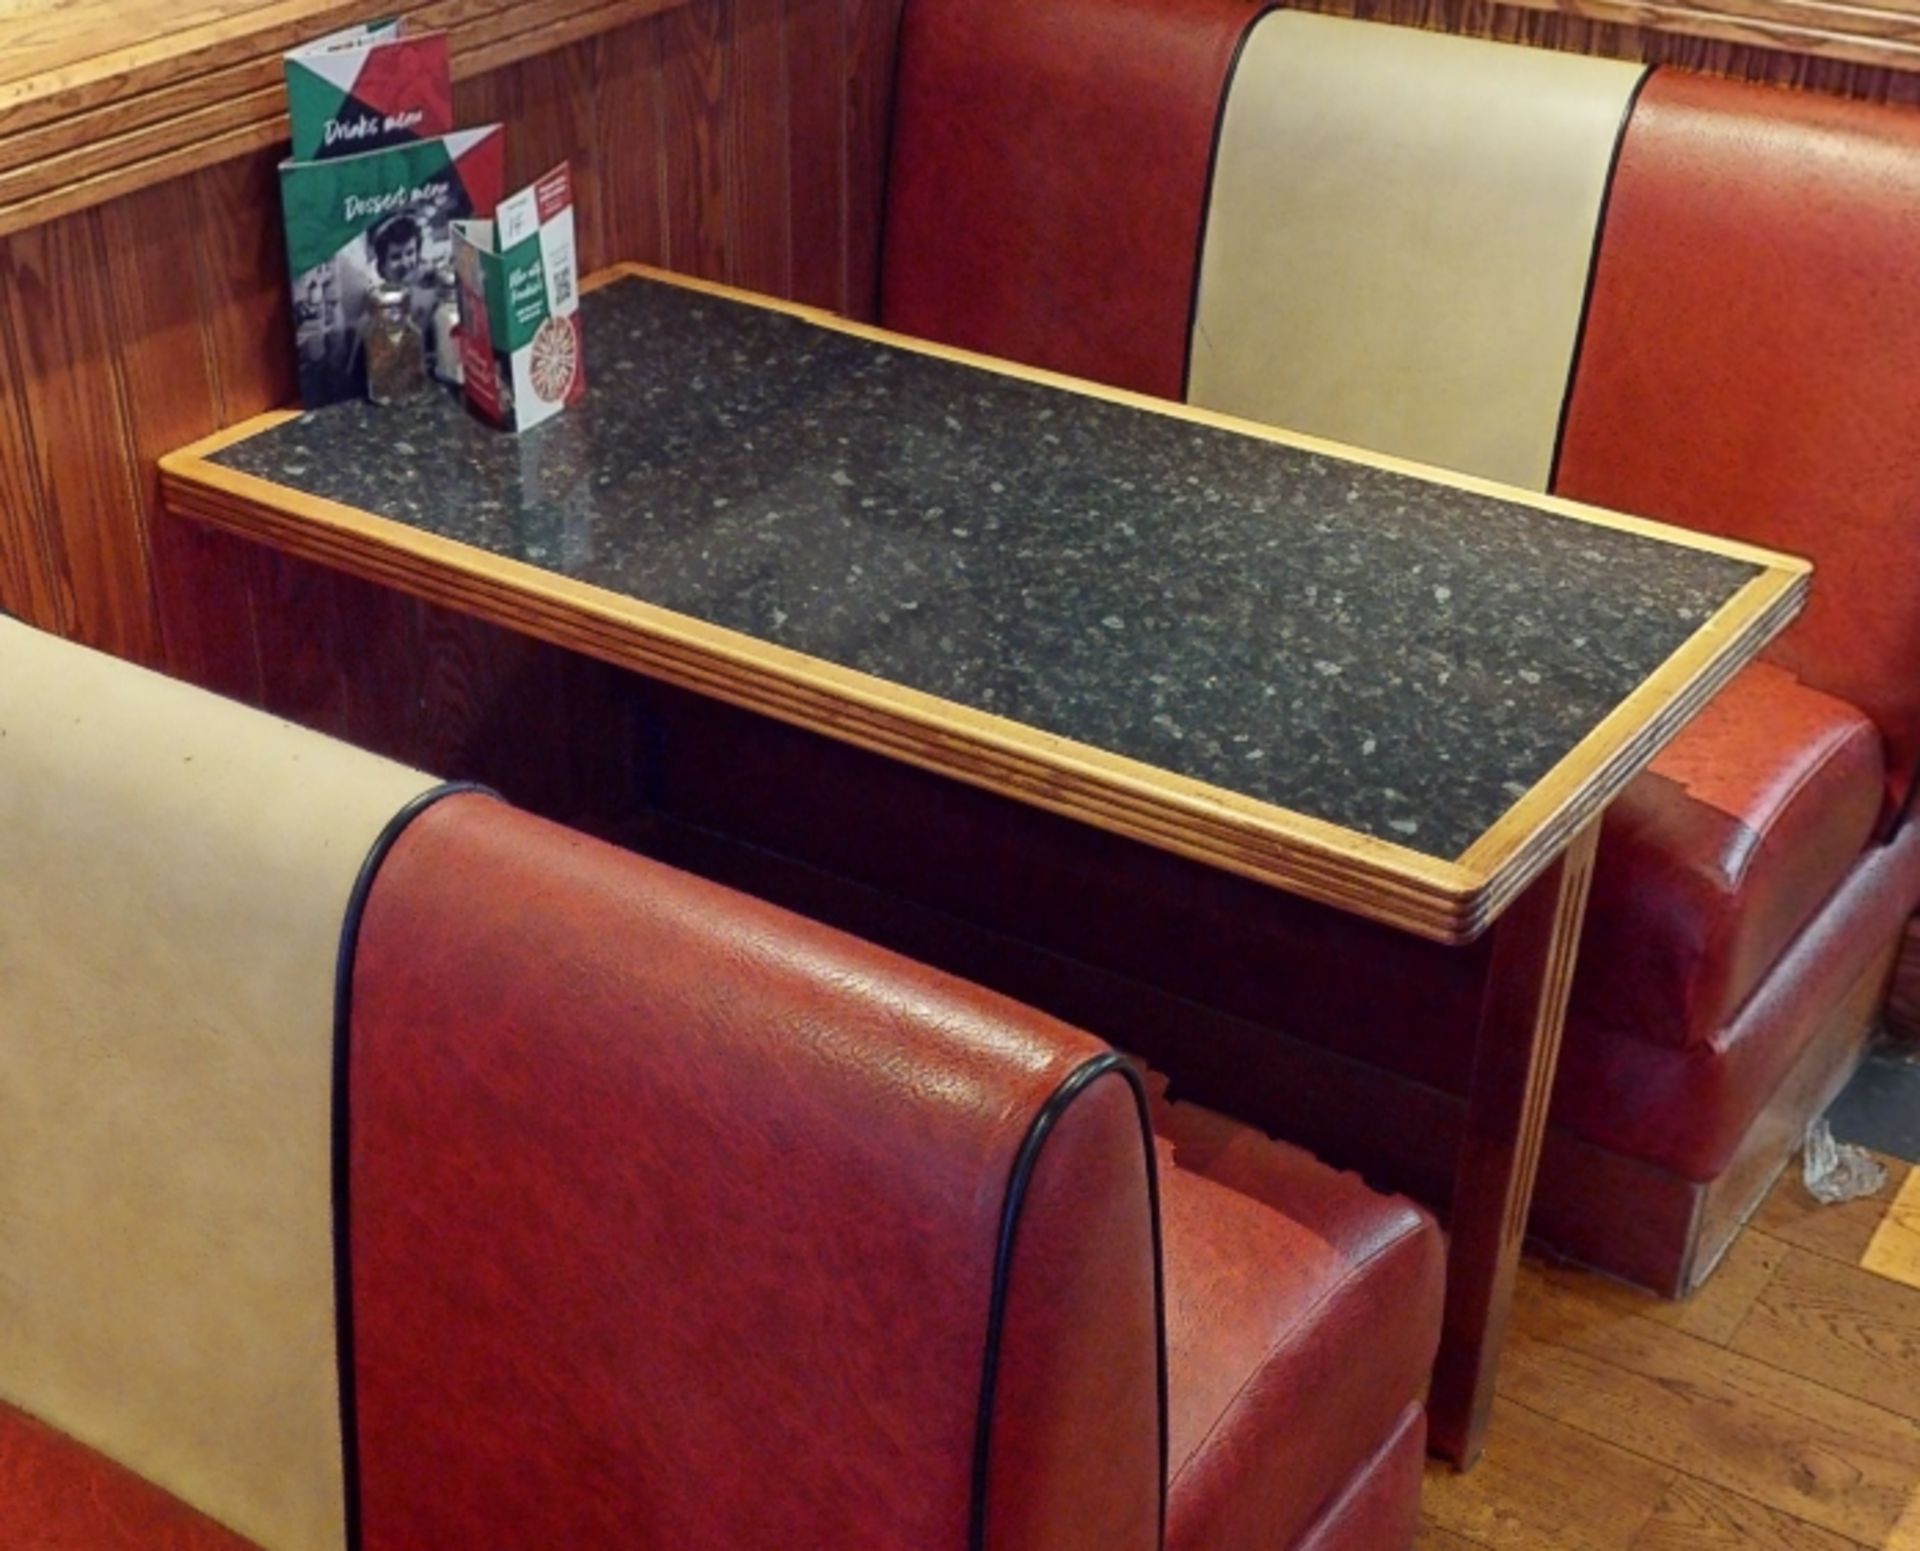 1 x Selection of Double Seating Benches and Dining Tables to Seat Upto 12 Persons - Retro 1950's - Image 7 of 8